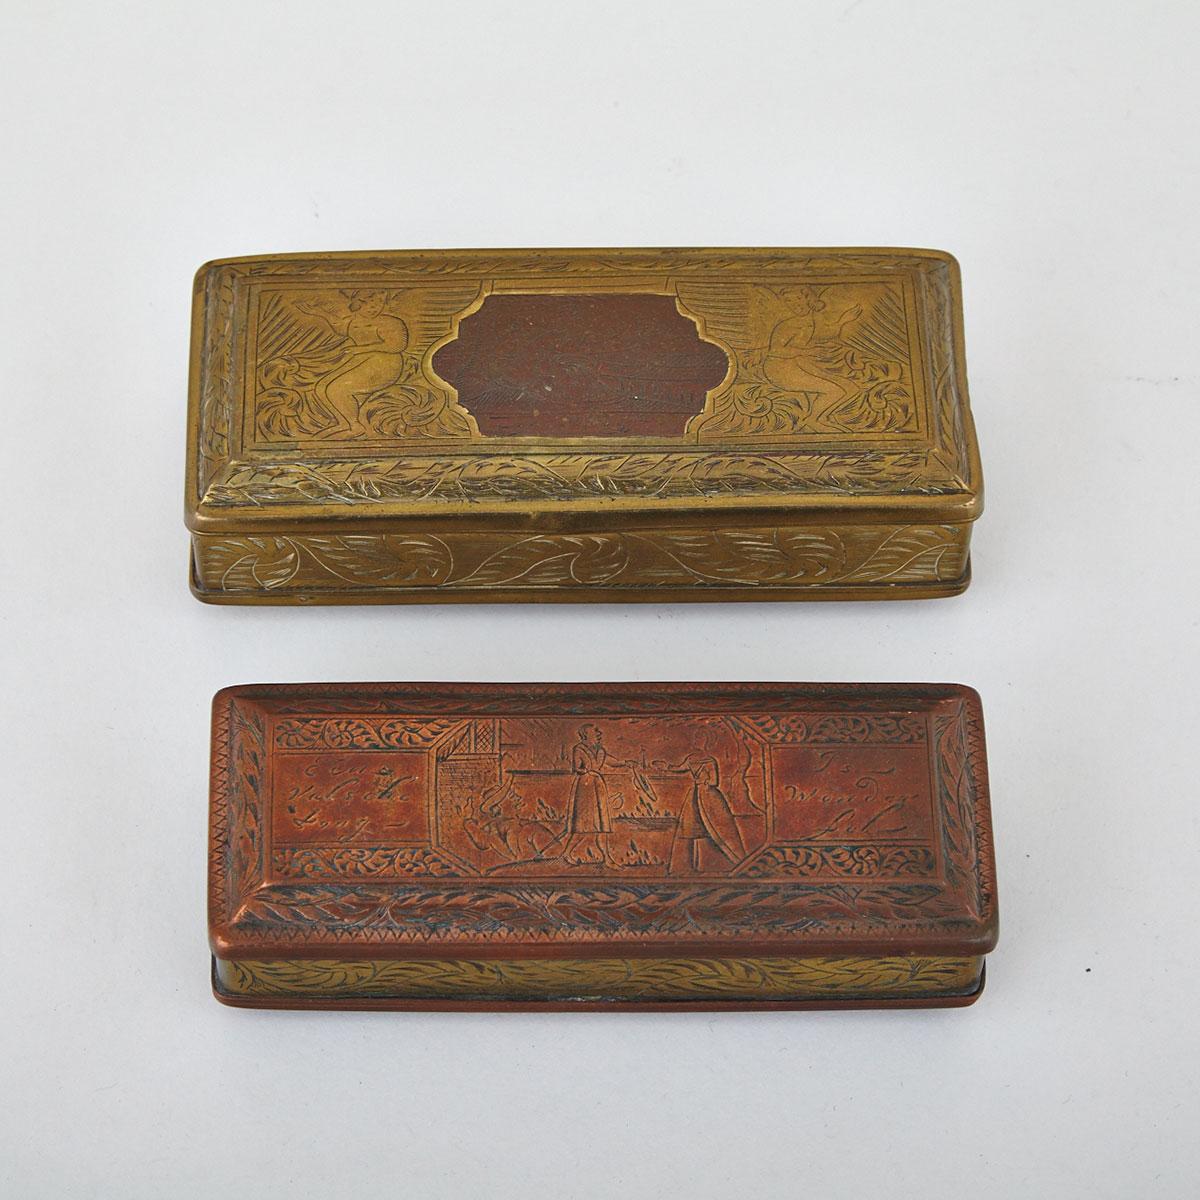 Two Dutch Brass and Copper Tobacco Boxes, mid 18th century